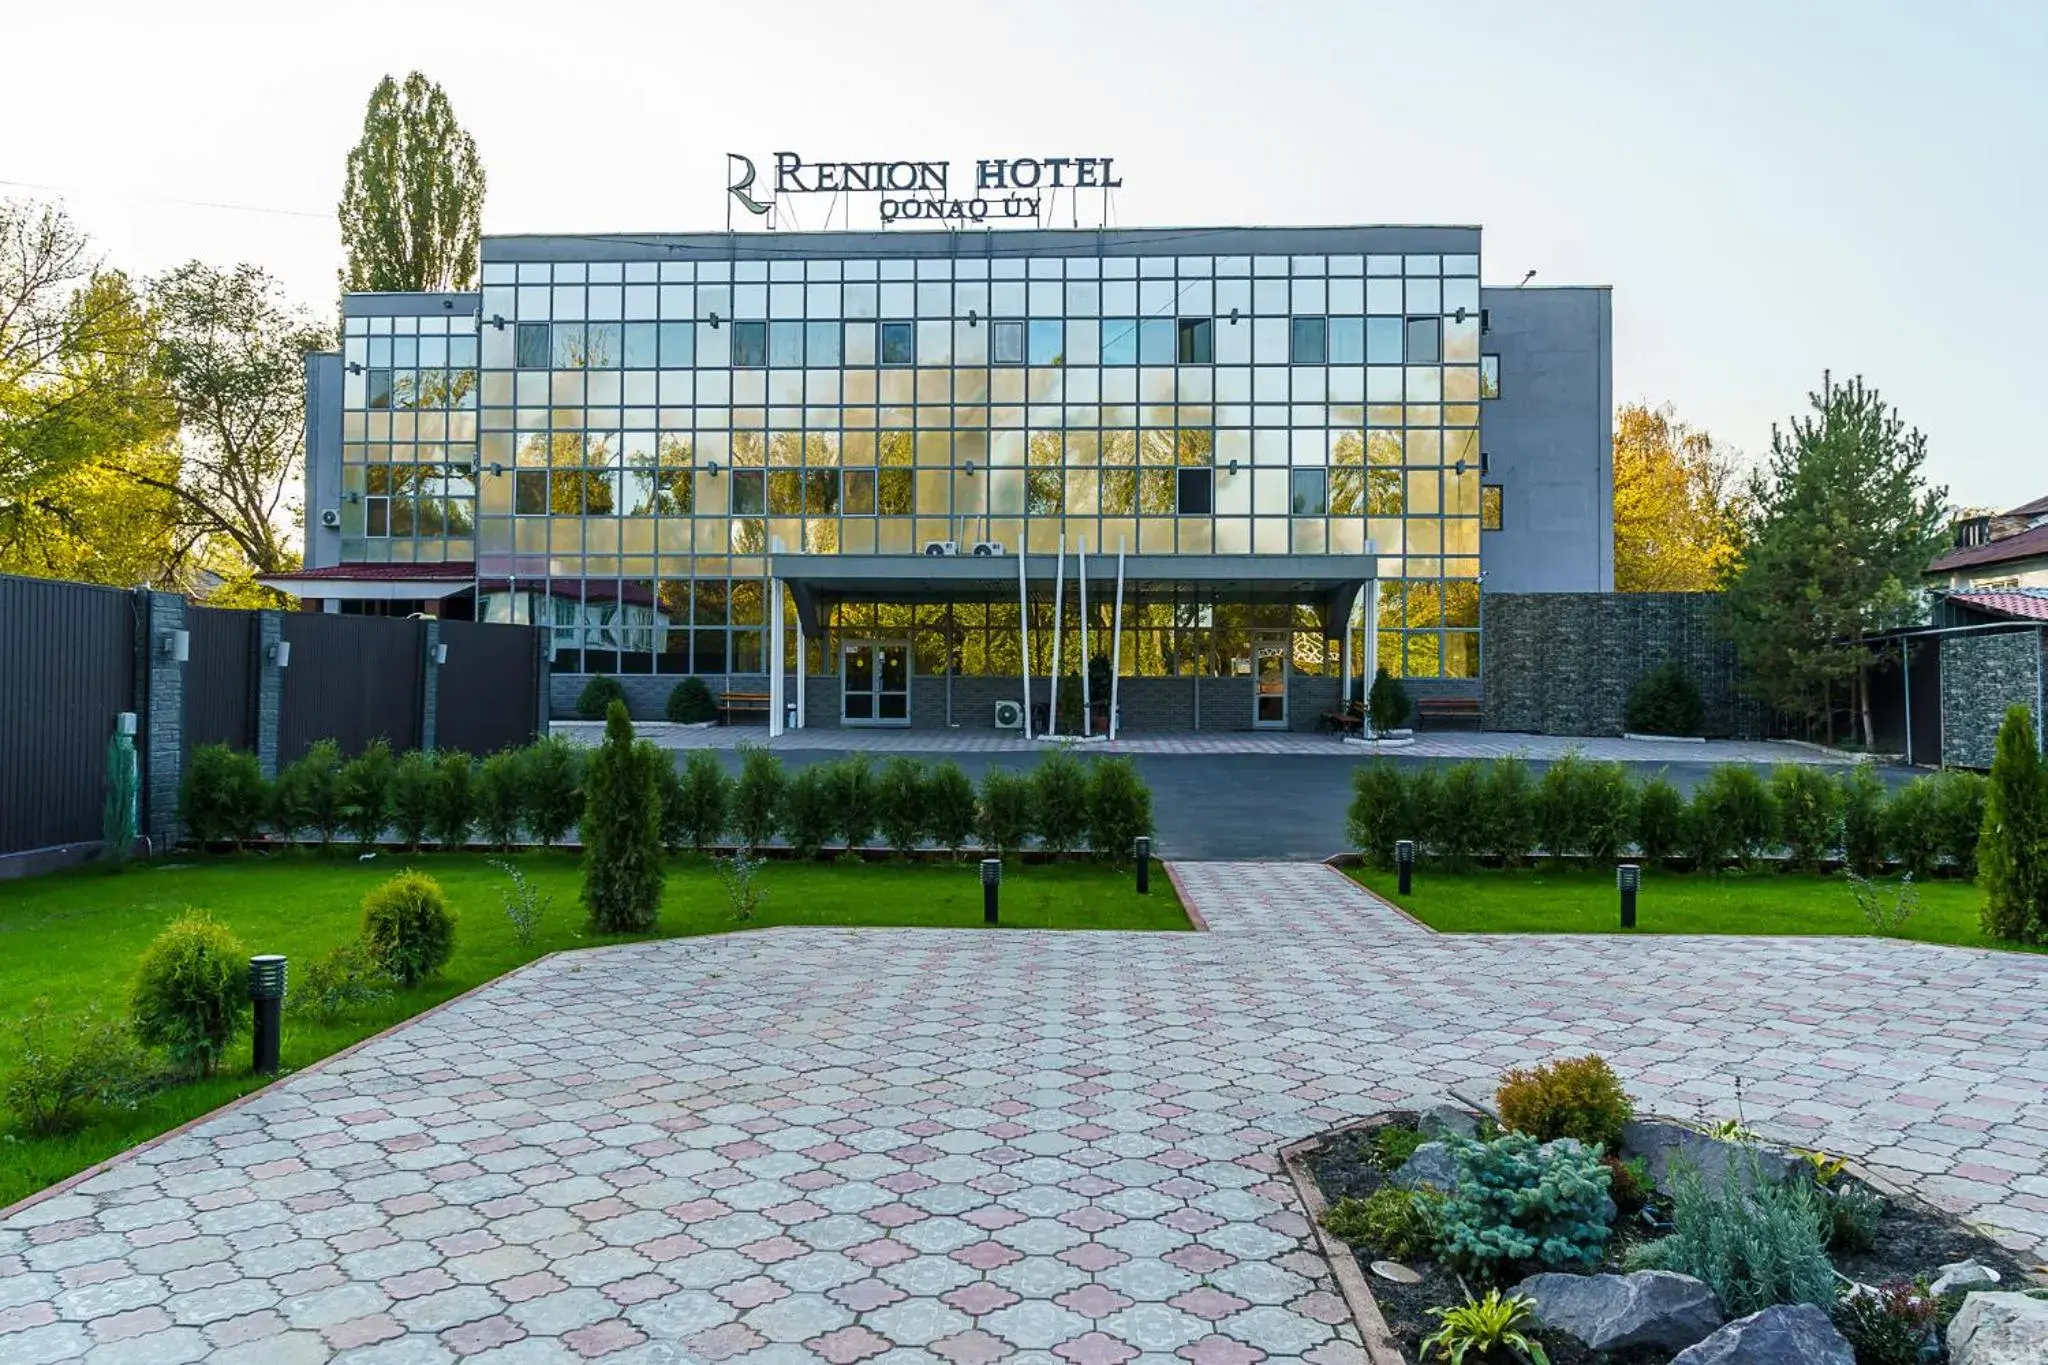 Property building in Renion Hotel